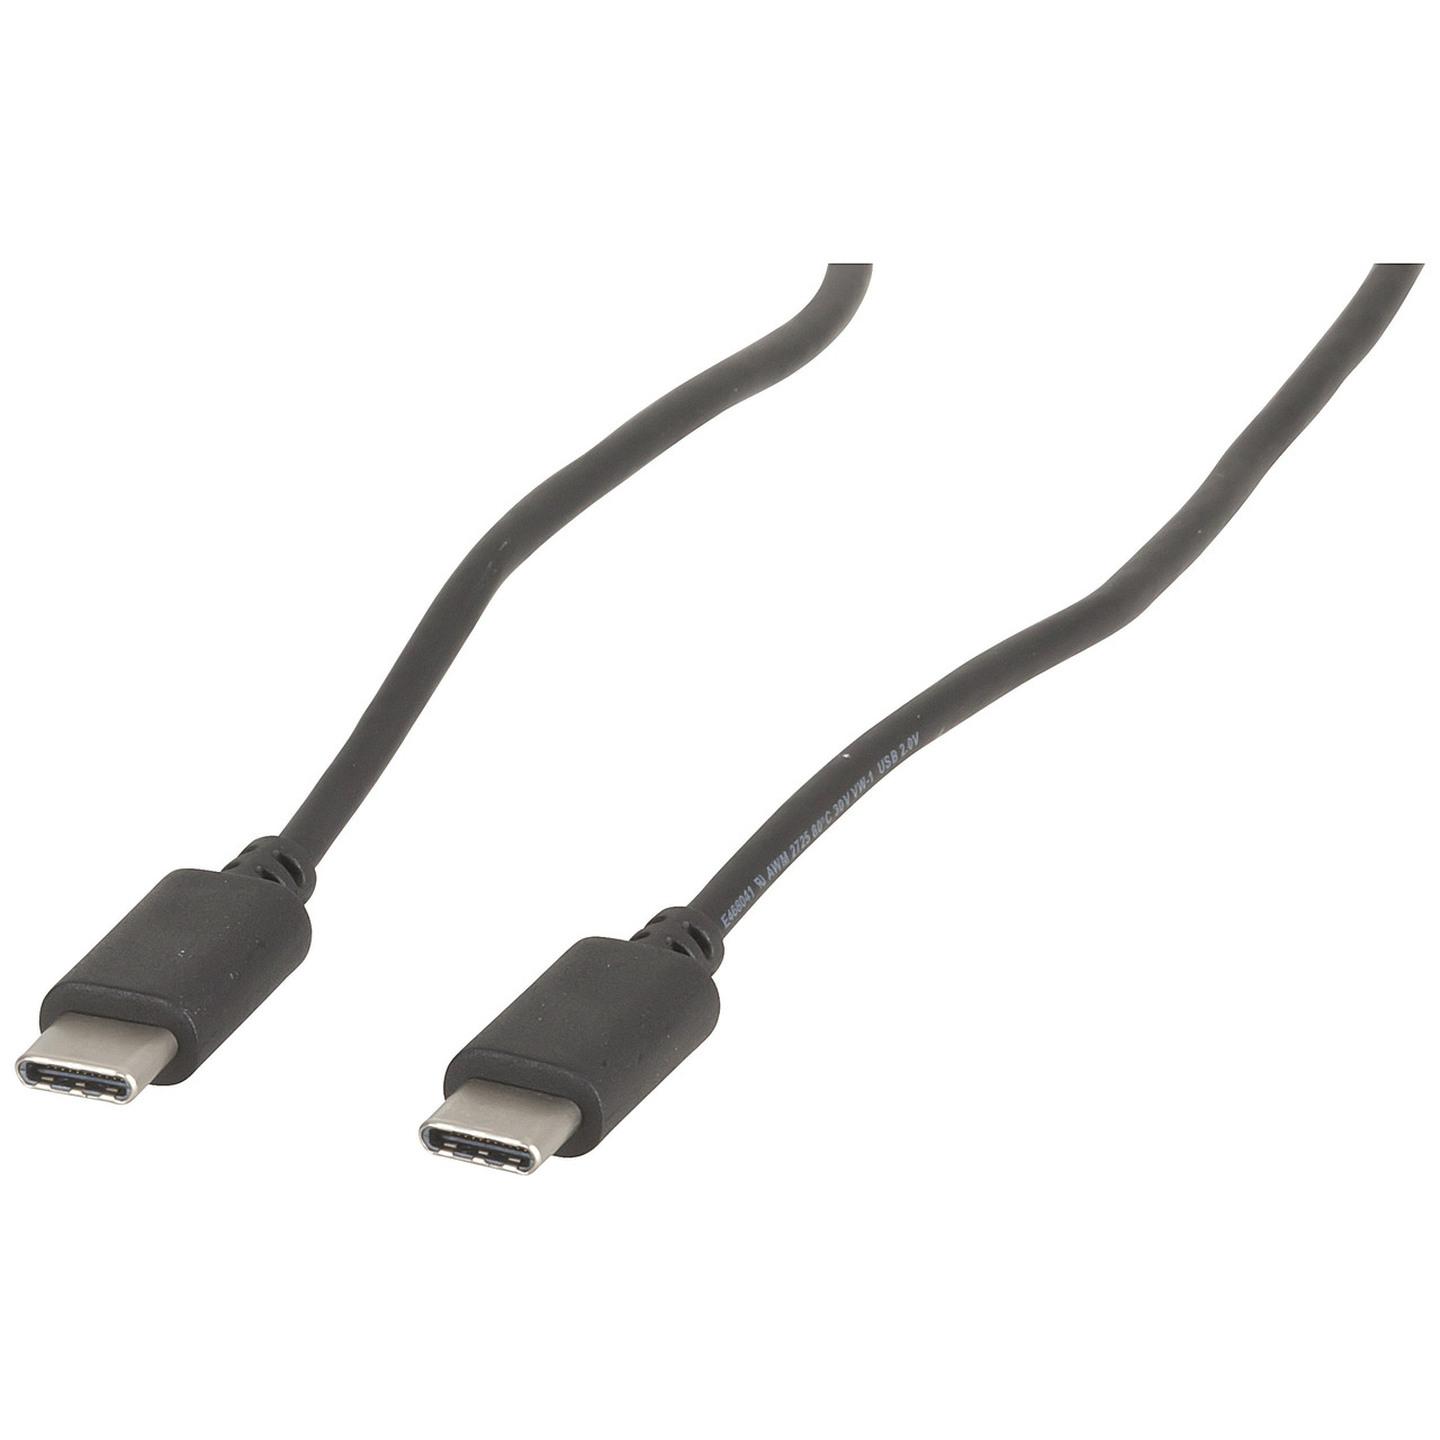 USB Type C to USB Type C Cable 1m